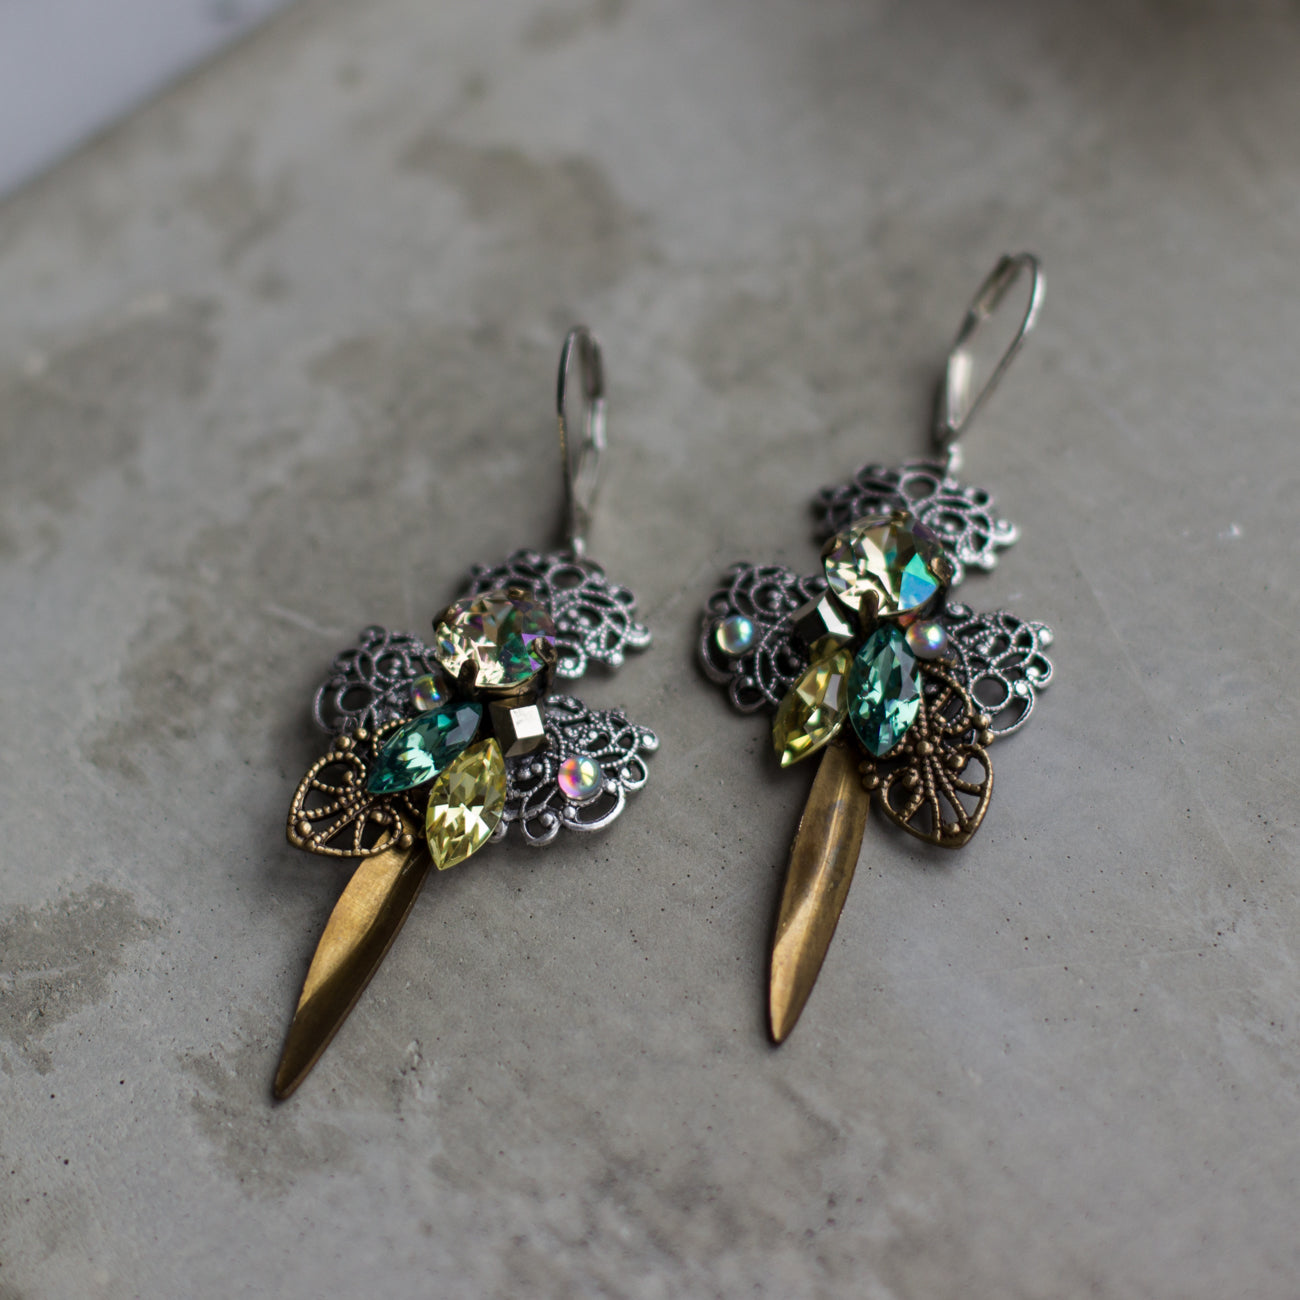 Shop elegant green, yellow, silver, and brass filigree earrings. Perfect for any occasion, these stylish dangle drop earrings add a touch of glamour to any outfit and make a great gift idea. 